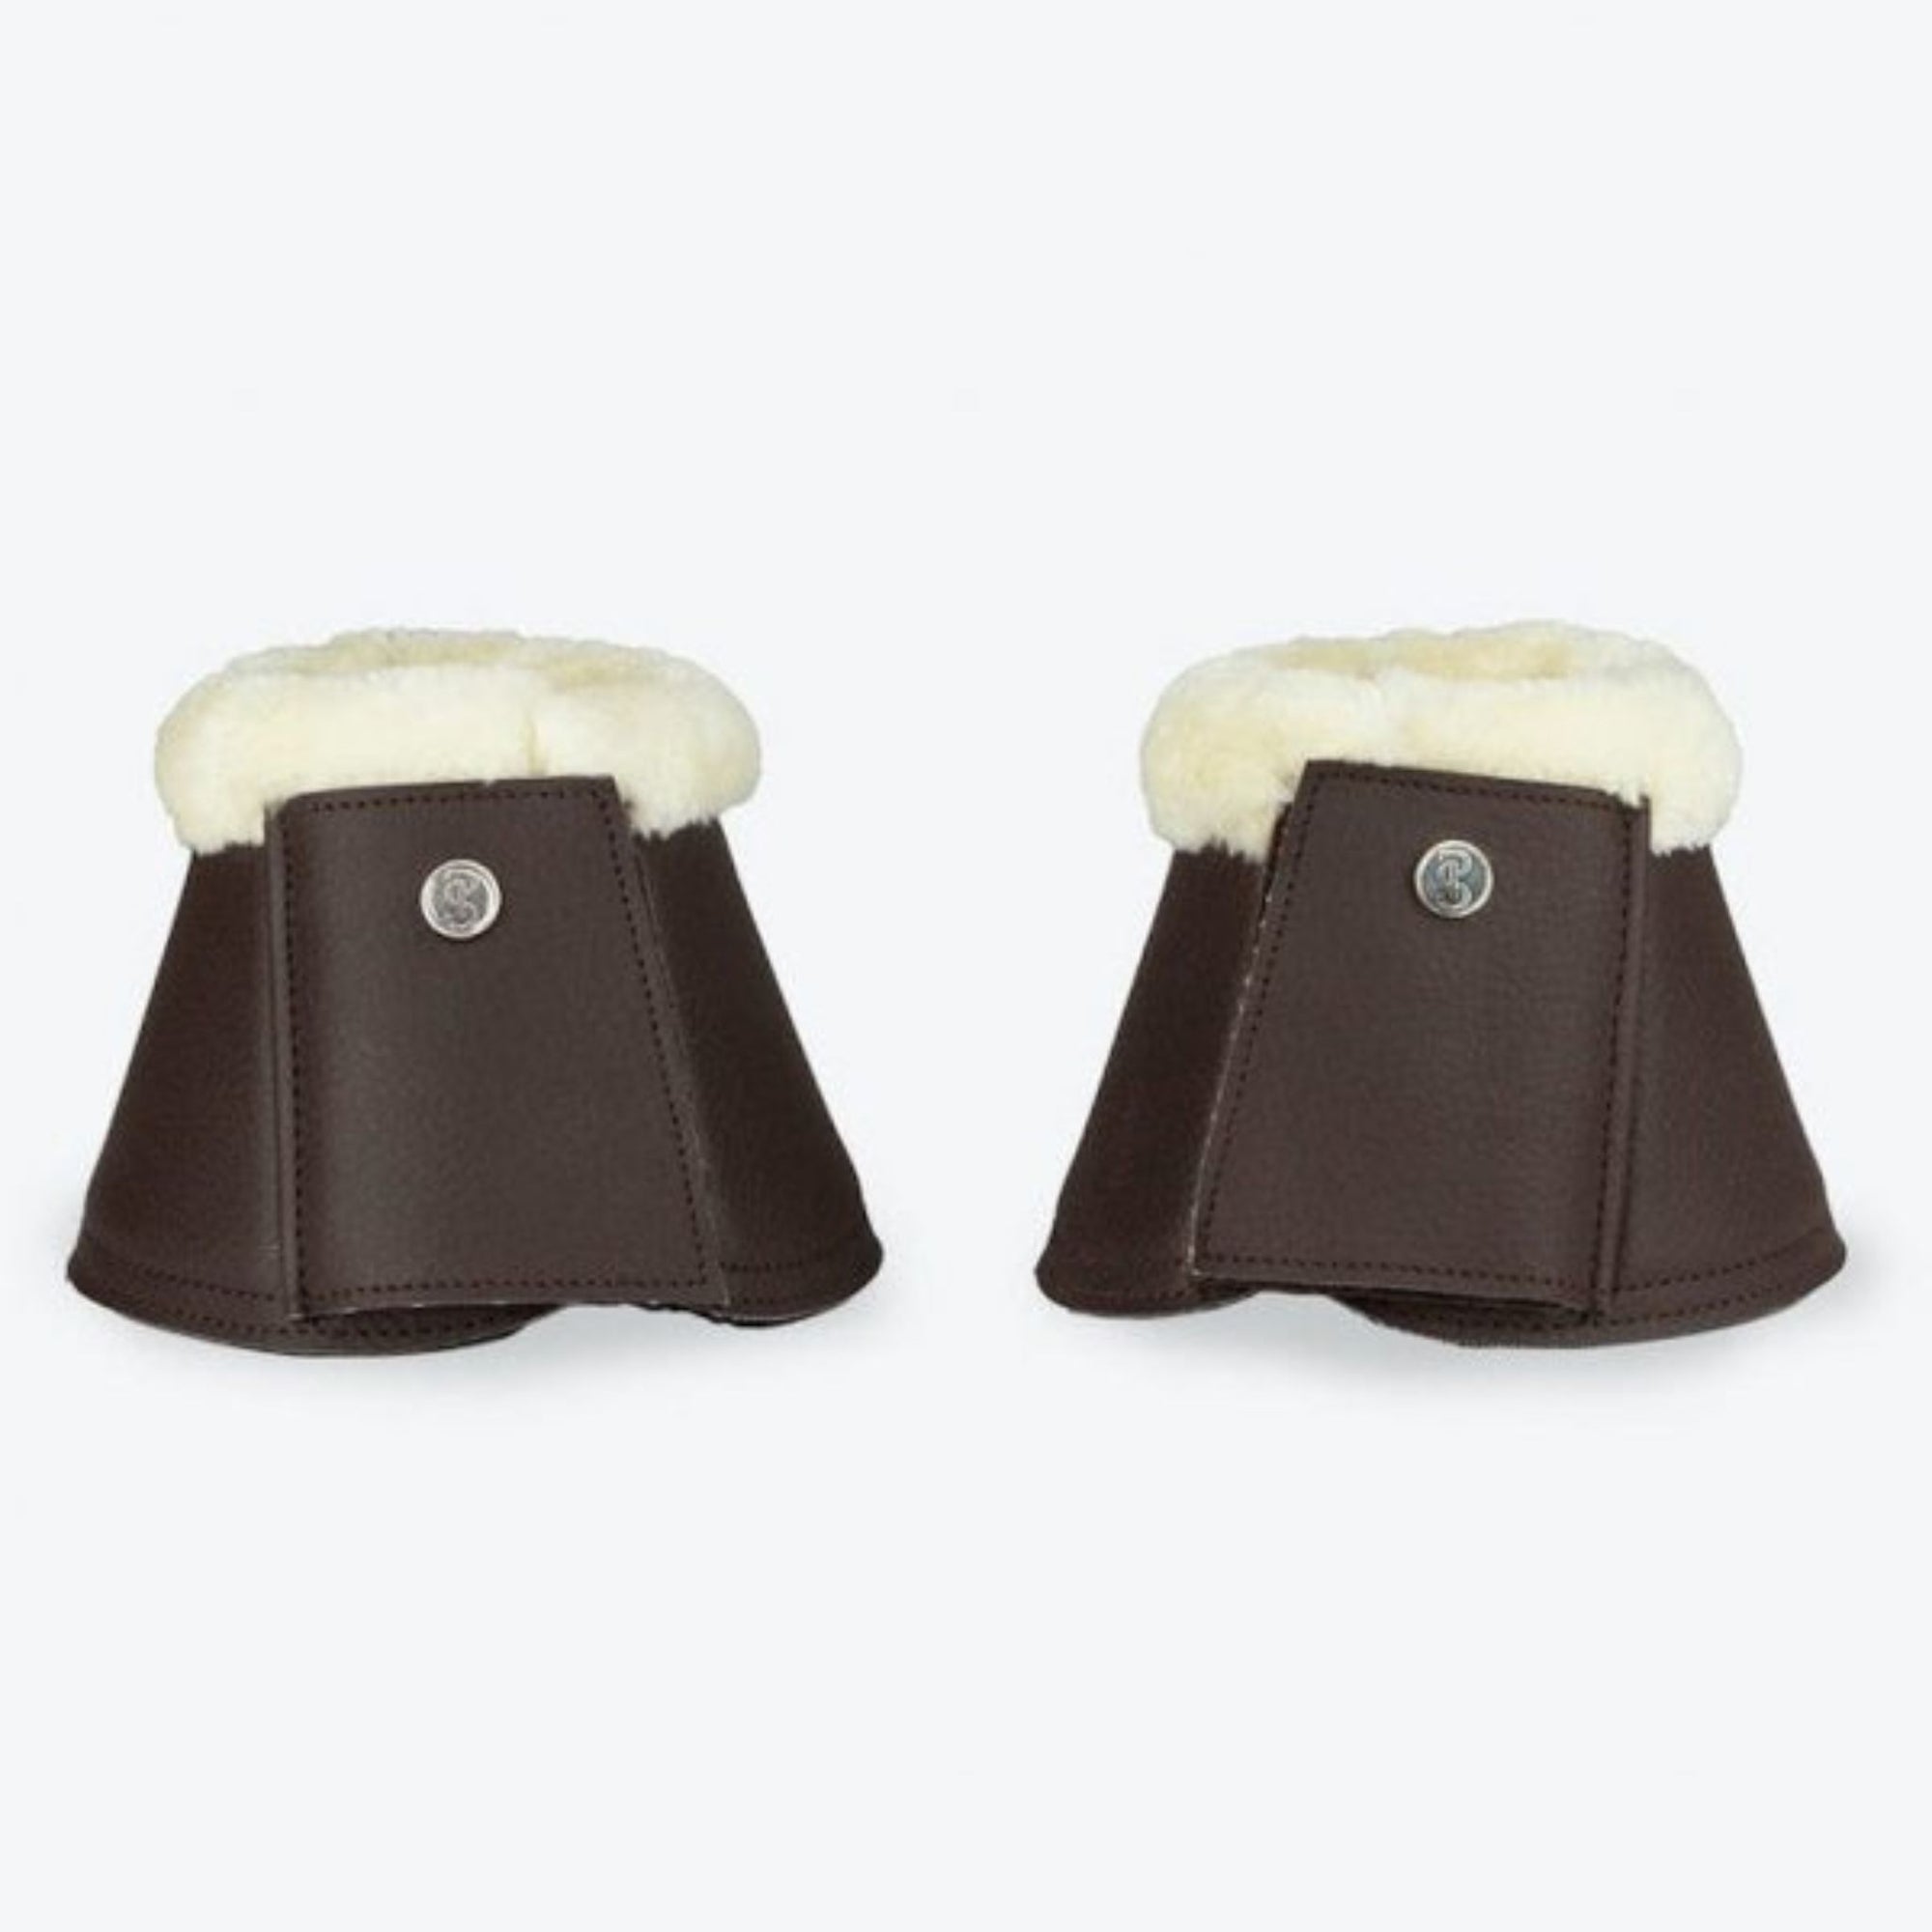 Deep Chocolate bell boots with fluffy top rims and a small PSOS silver badge on the straps